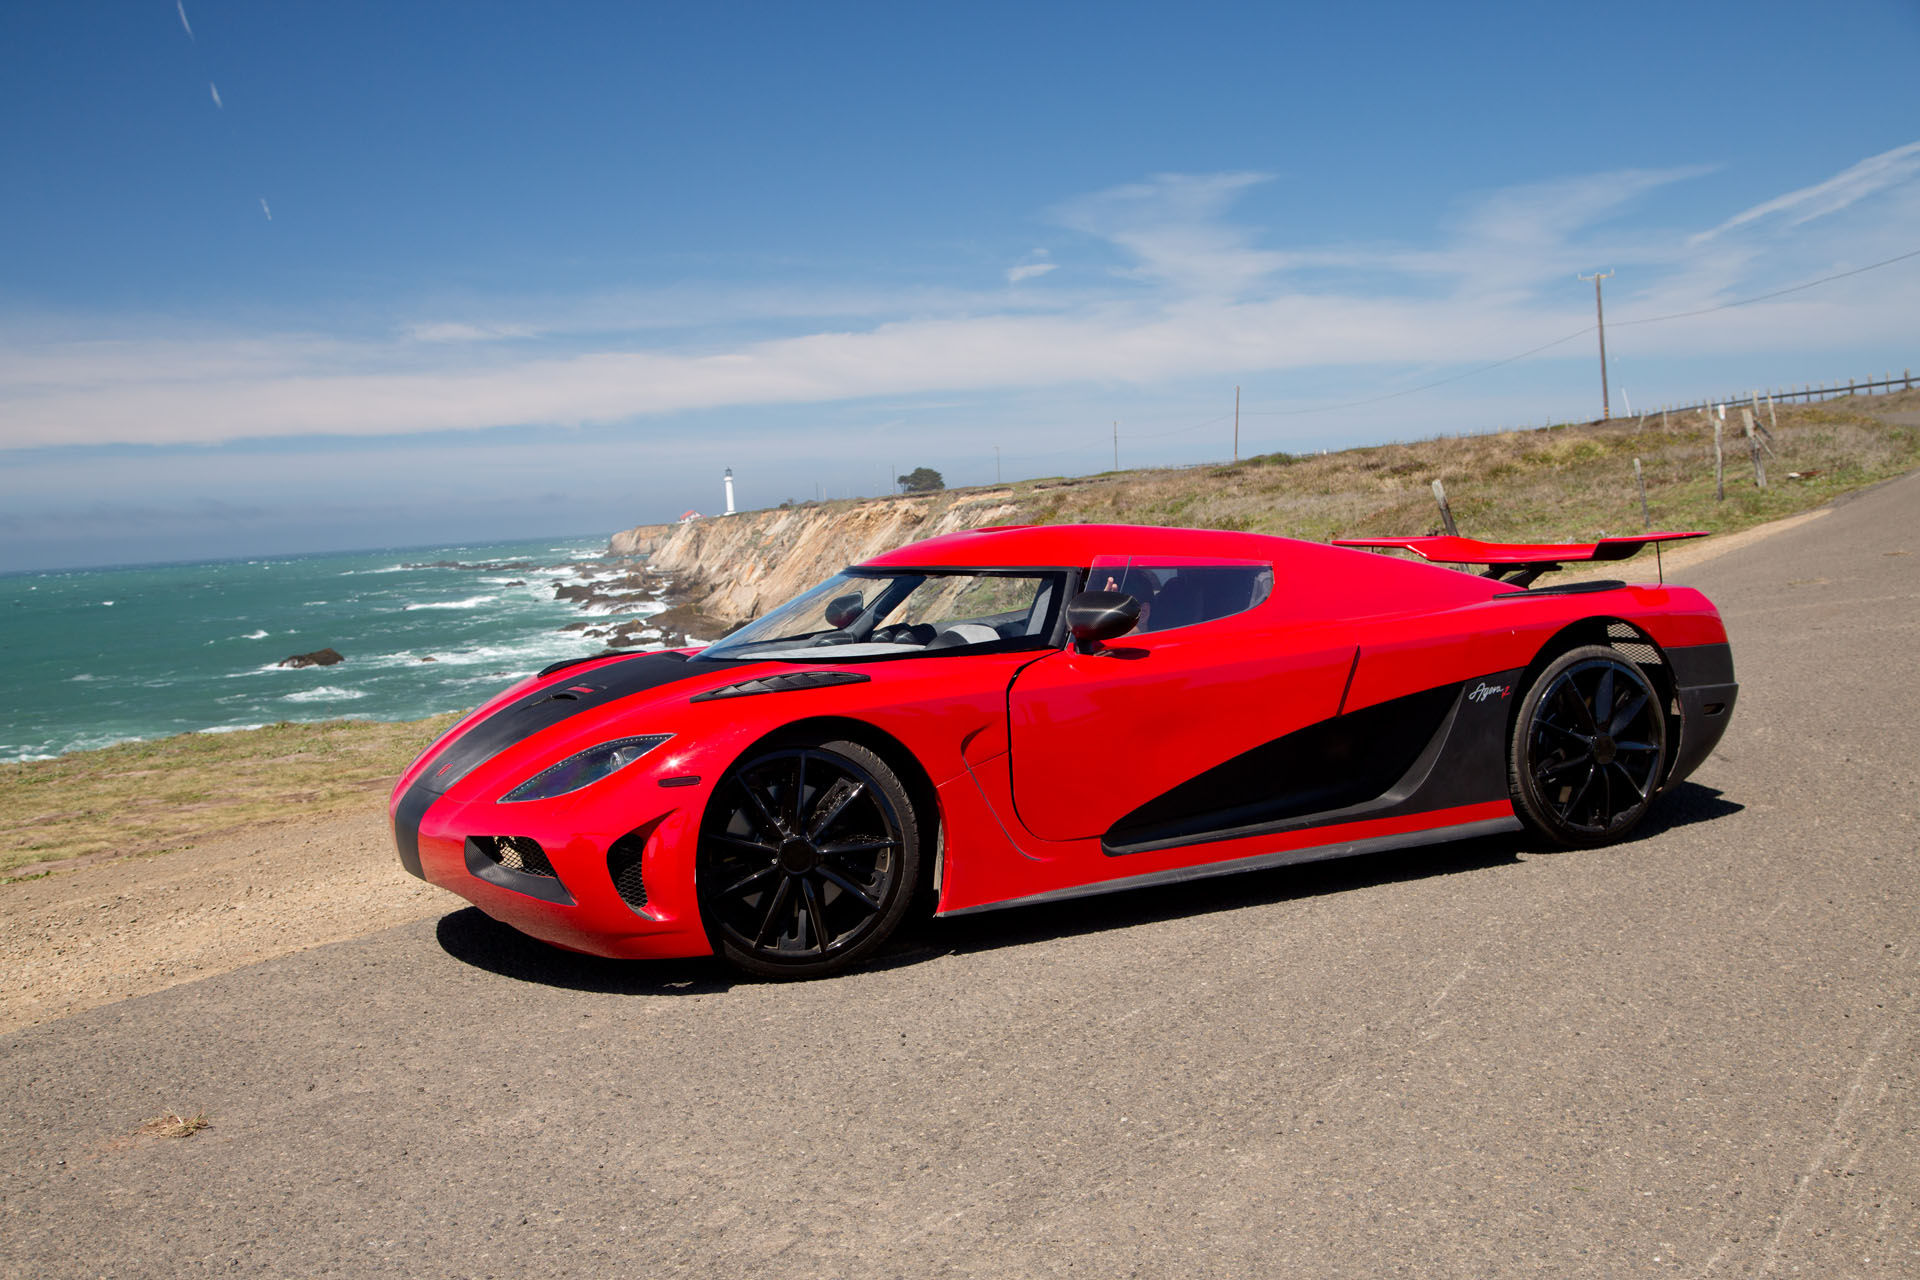 General 1920x1280 Koenigsegg Agera Koenigsegg fakes red cars car road sky coast vehicle Need for Speed (movie) props Swedish cars Hypercar